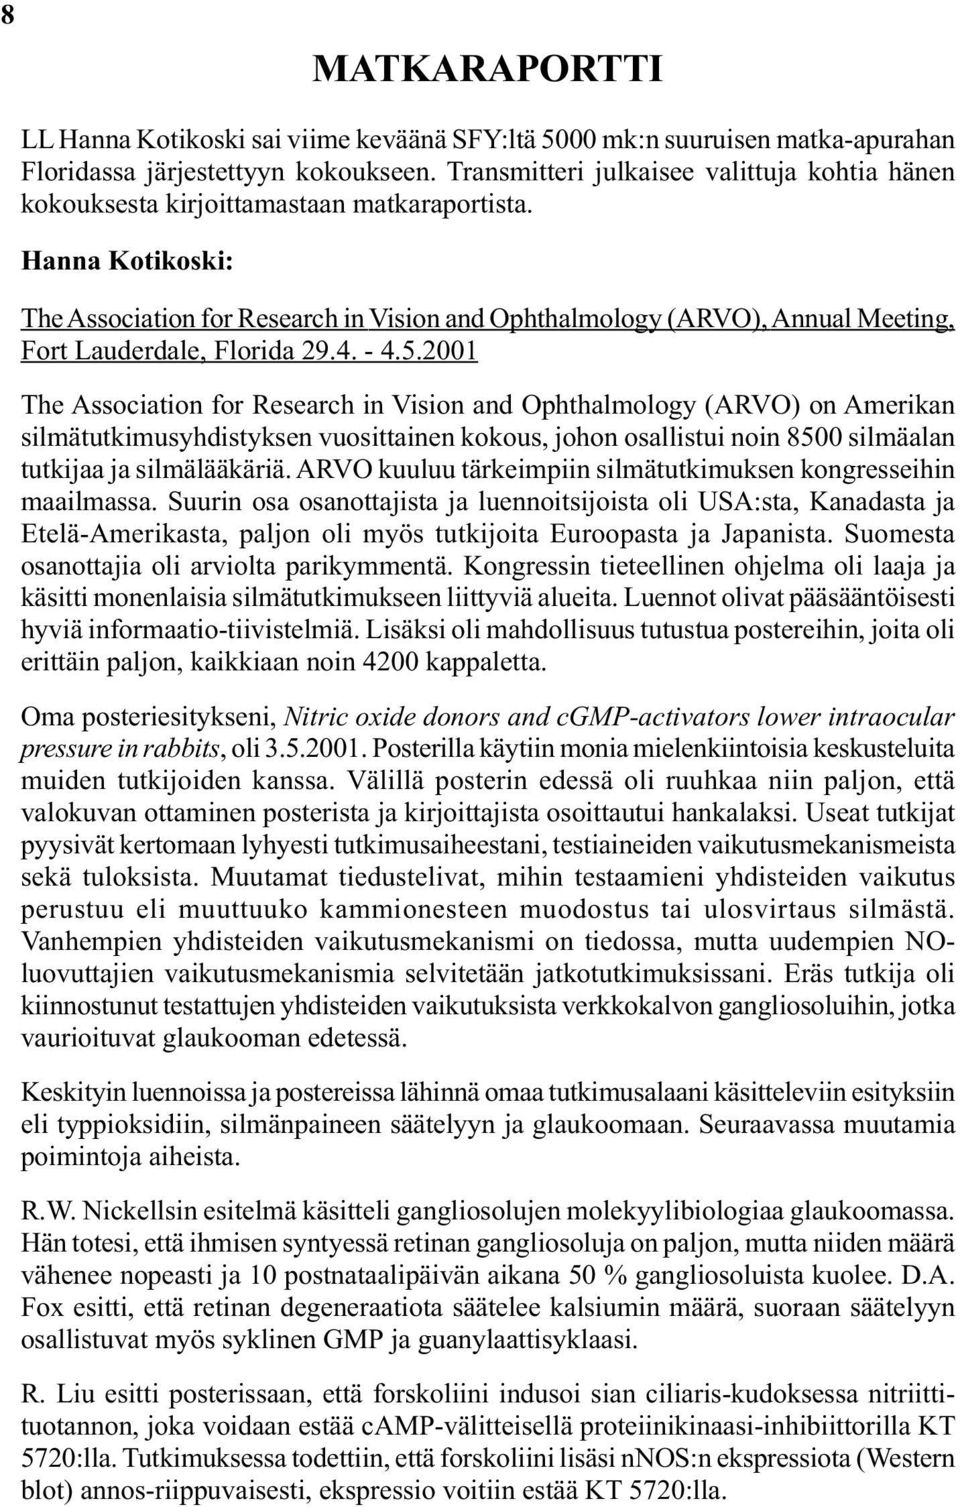 Hanna Kotikoski: The Association for Research in Vision and Ophthalmology (ARVO), Annual Meeting, Fort Lauderdale, Florida 29.4. - 4.5.